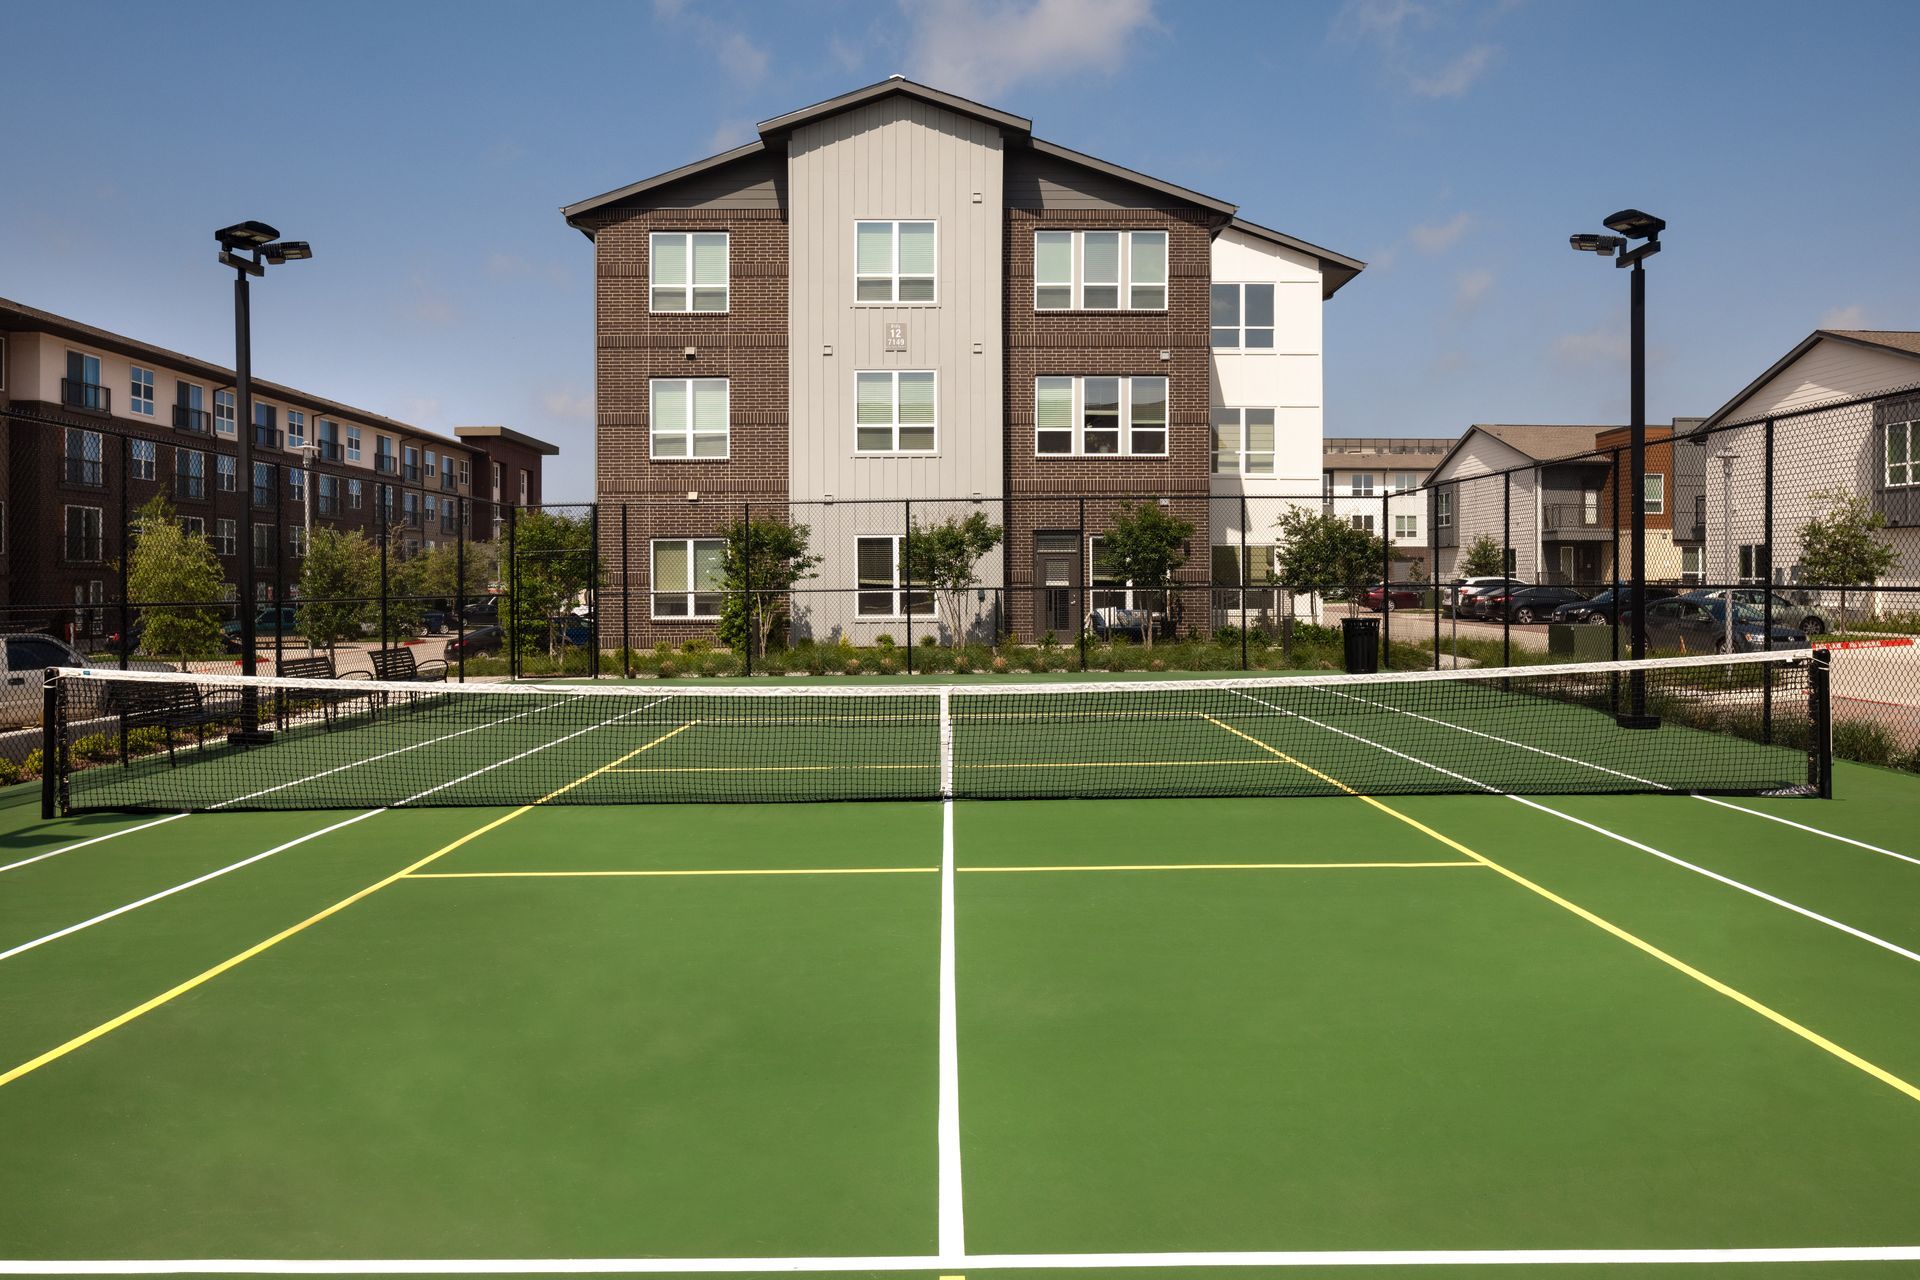 A tennis court with a building in the background at Parkside at Craig Ranch.